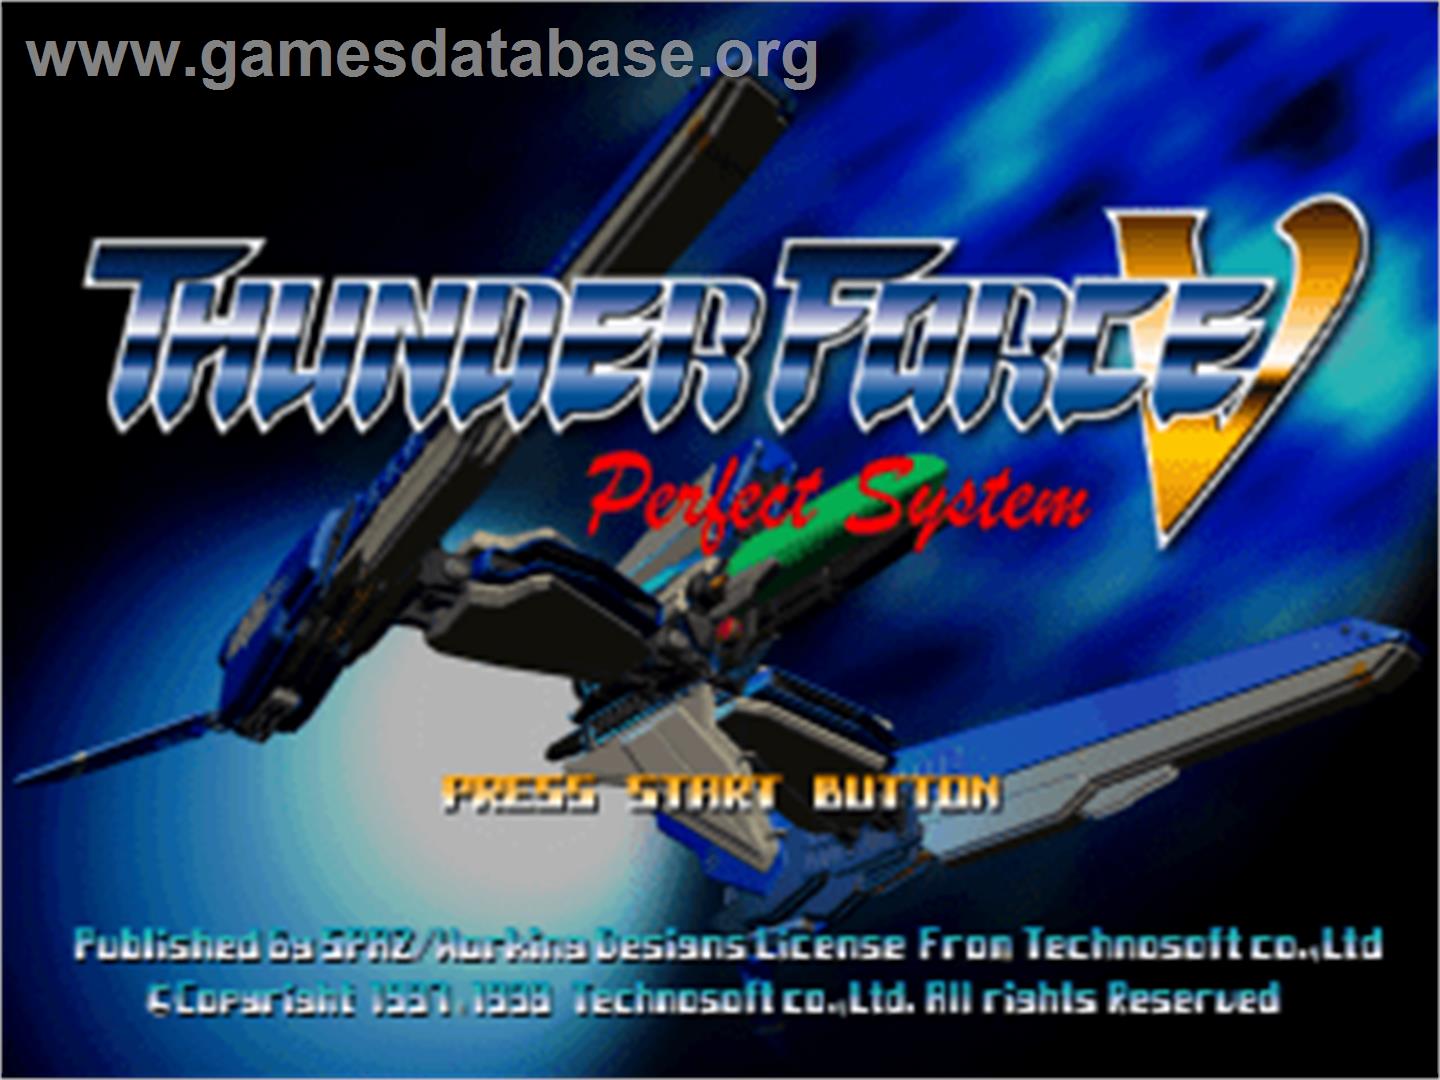 Thunder Force V: Perfect System - Sony Playstation - Artwork - Title Screen